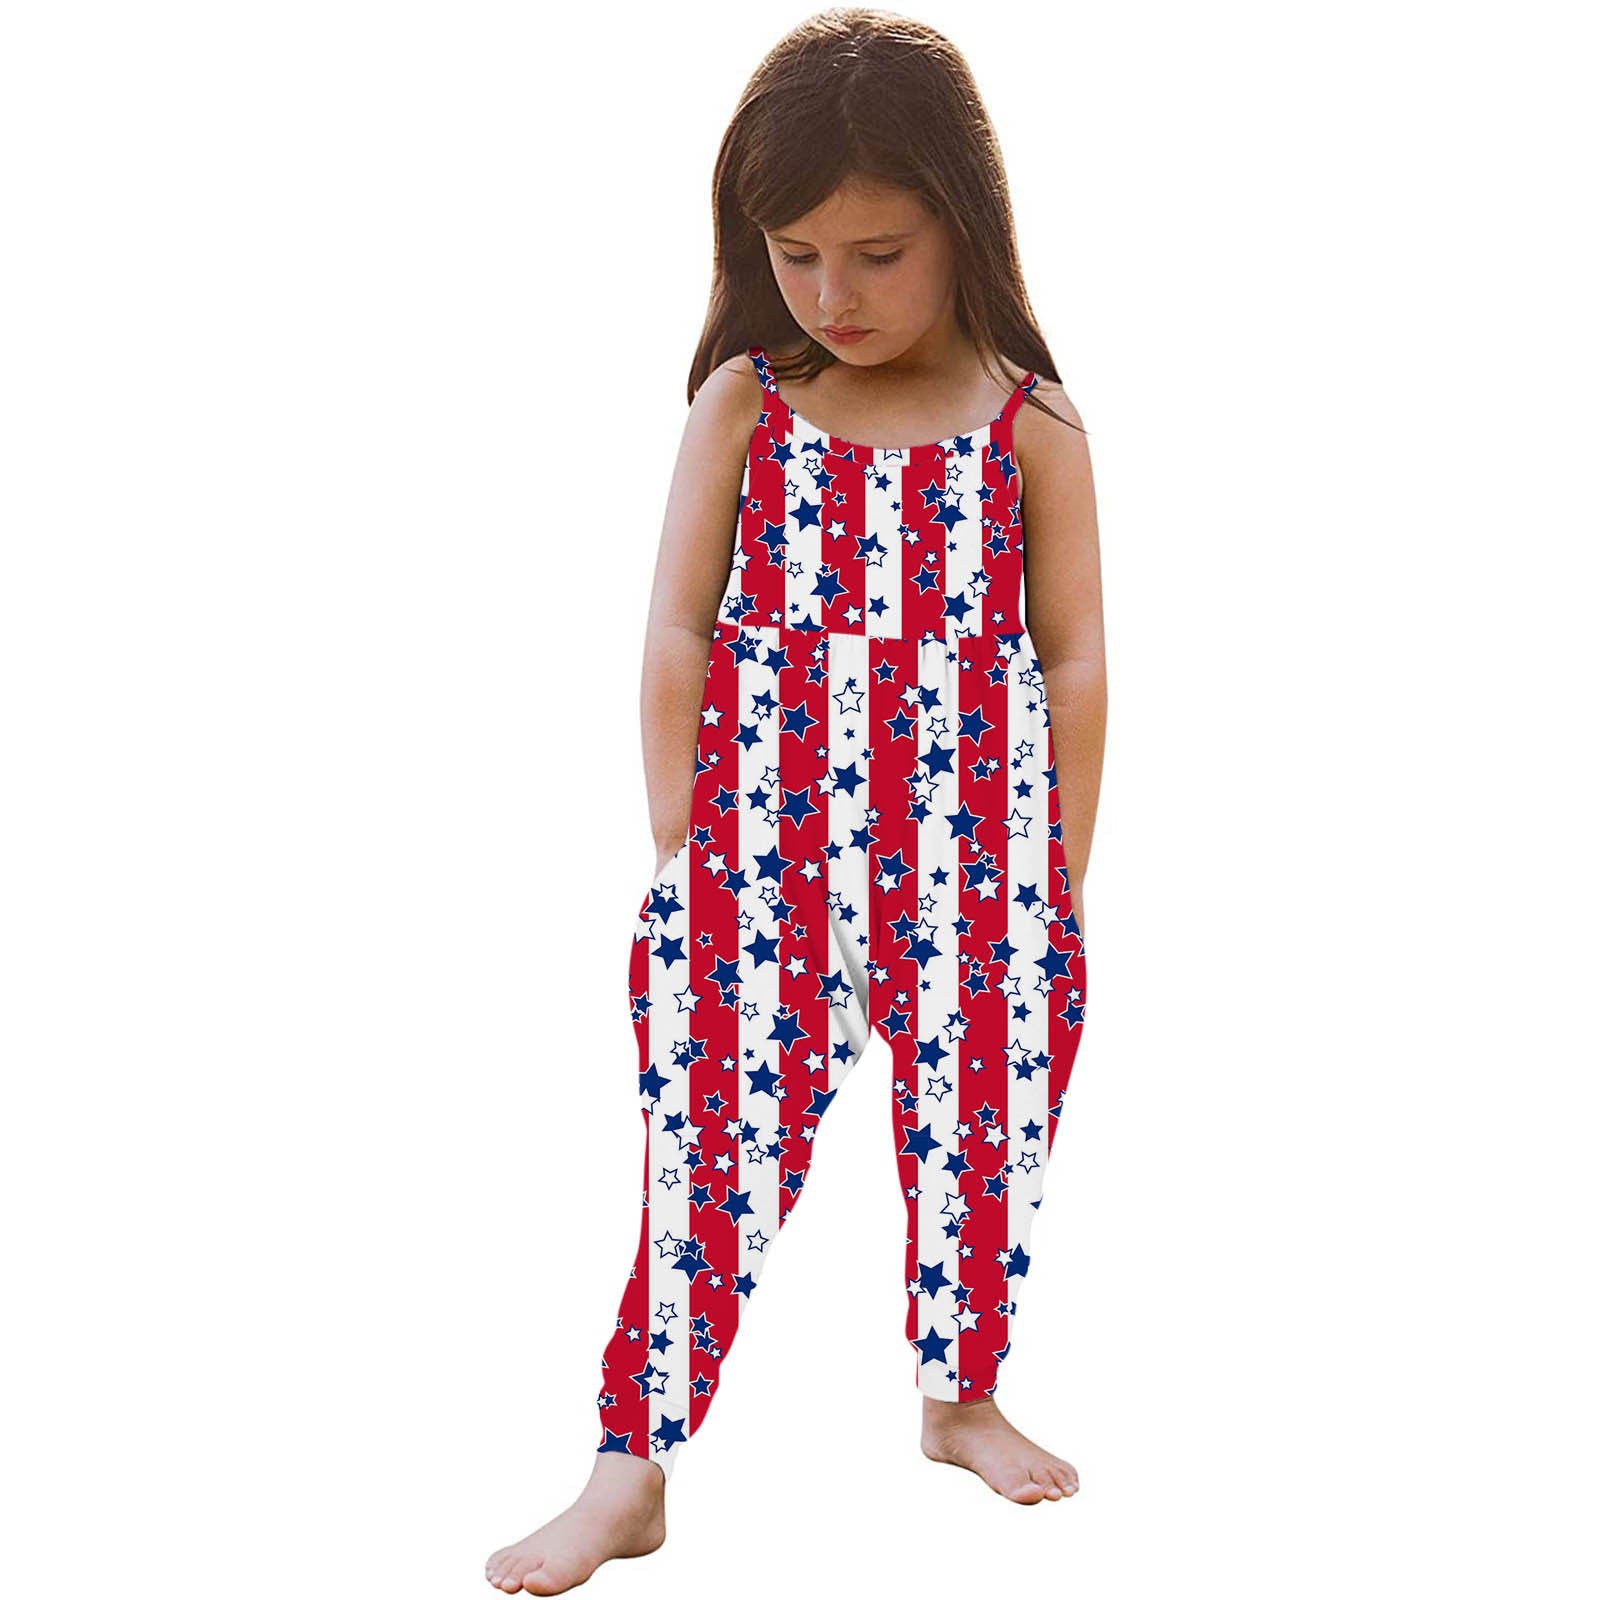 1-5Y Summer Toddler Girls' Suspenders Strapless Jumpsuit Romper A Variety Of Options Wholesale Kids Clothing USA